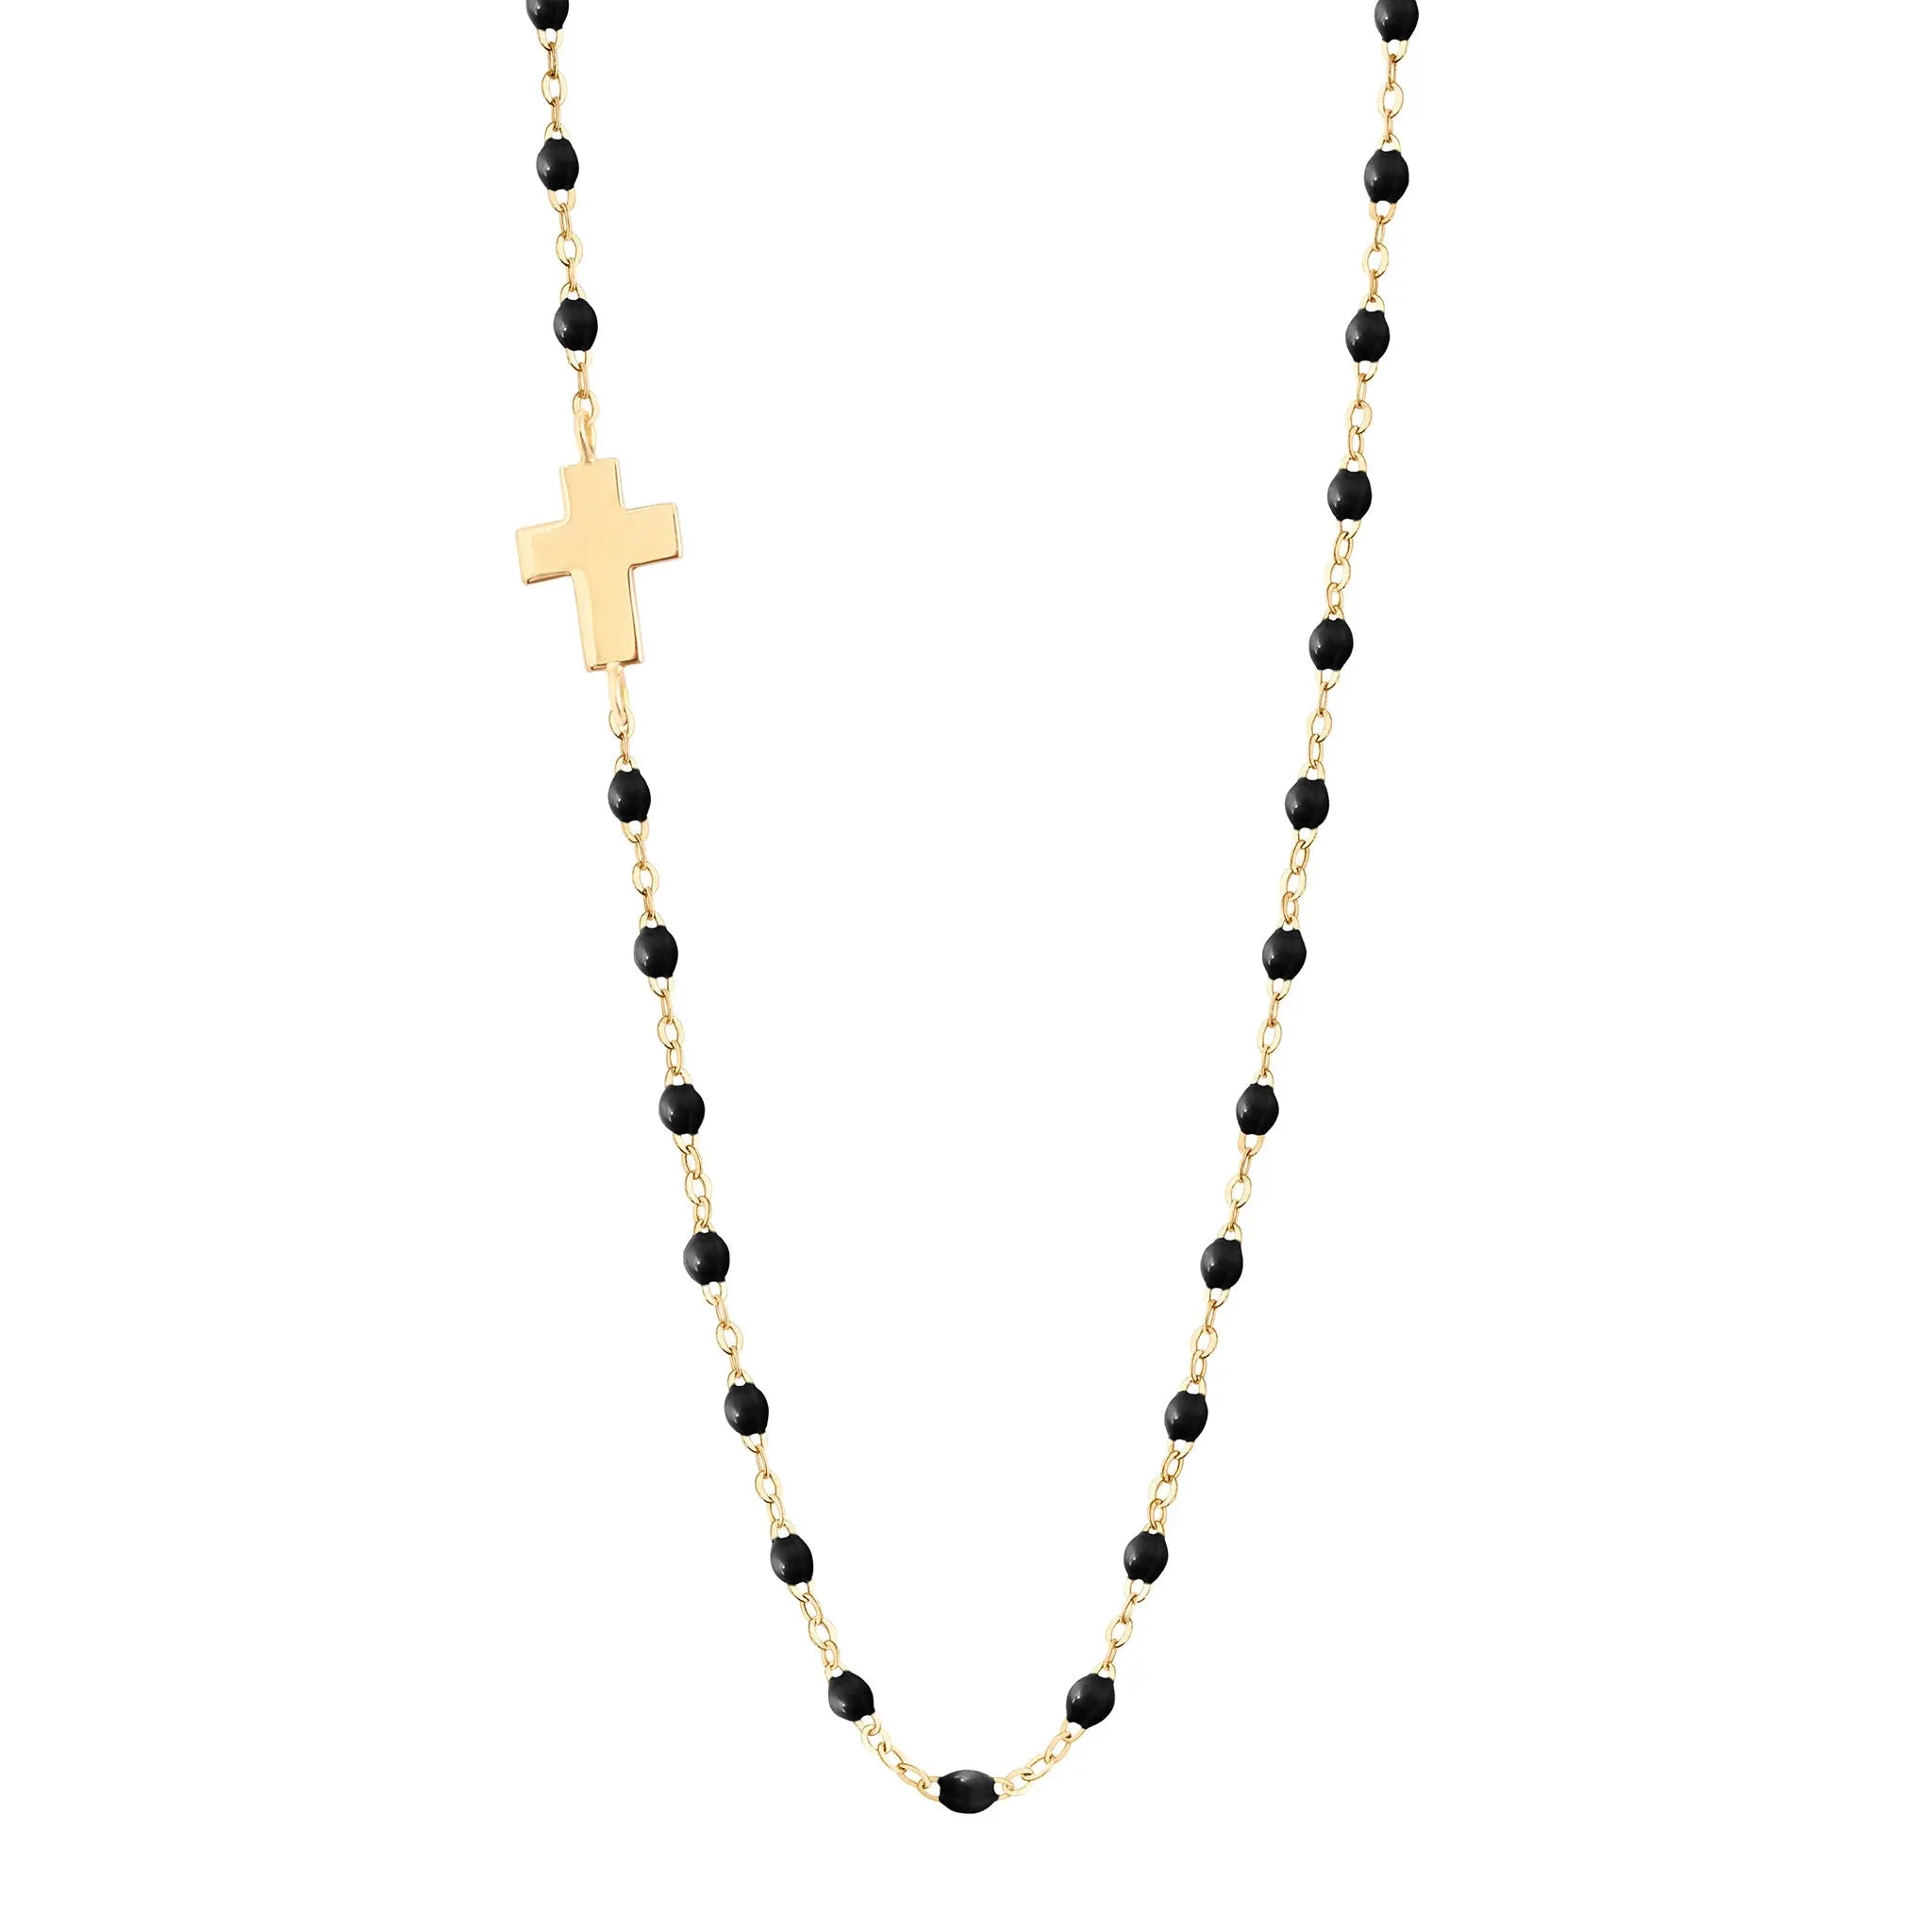 The Classic Gigi Cross Charm necklace with Black resin pearls by gigi CLOZEAU features signature 18 carat Yellow Gold and a timelessly elegant design. Each jewel is unique, artisanally made its our family-owned workshop. The length is 16.5 inches with adjustabe clasp at 16.1 inches.